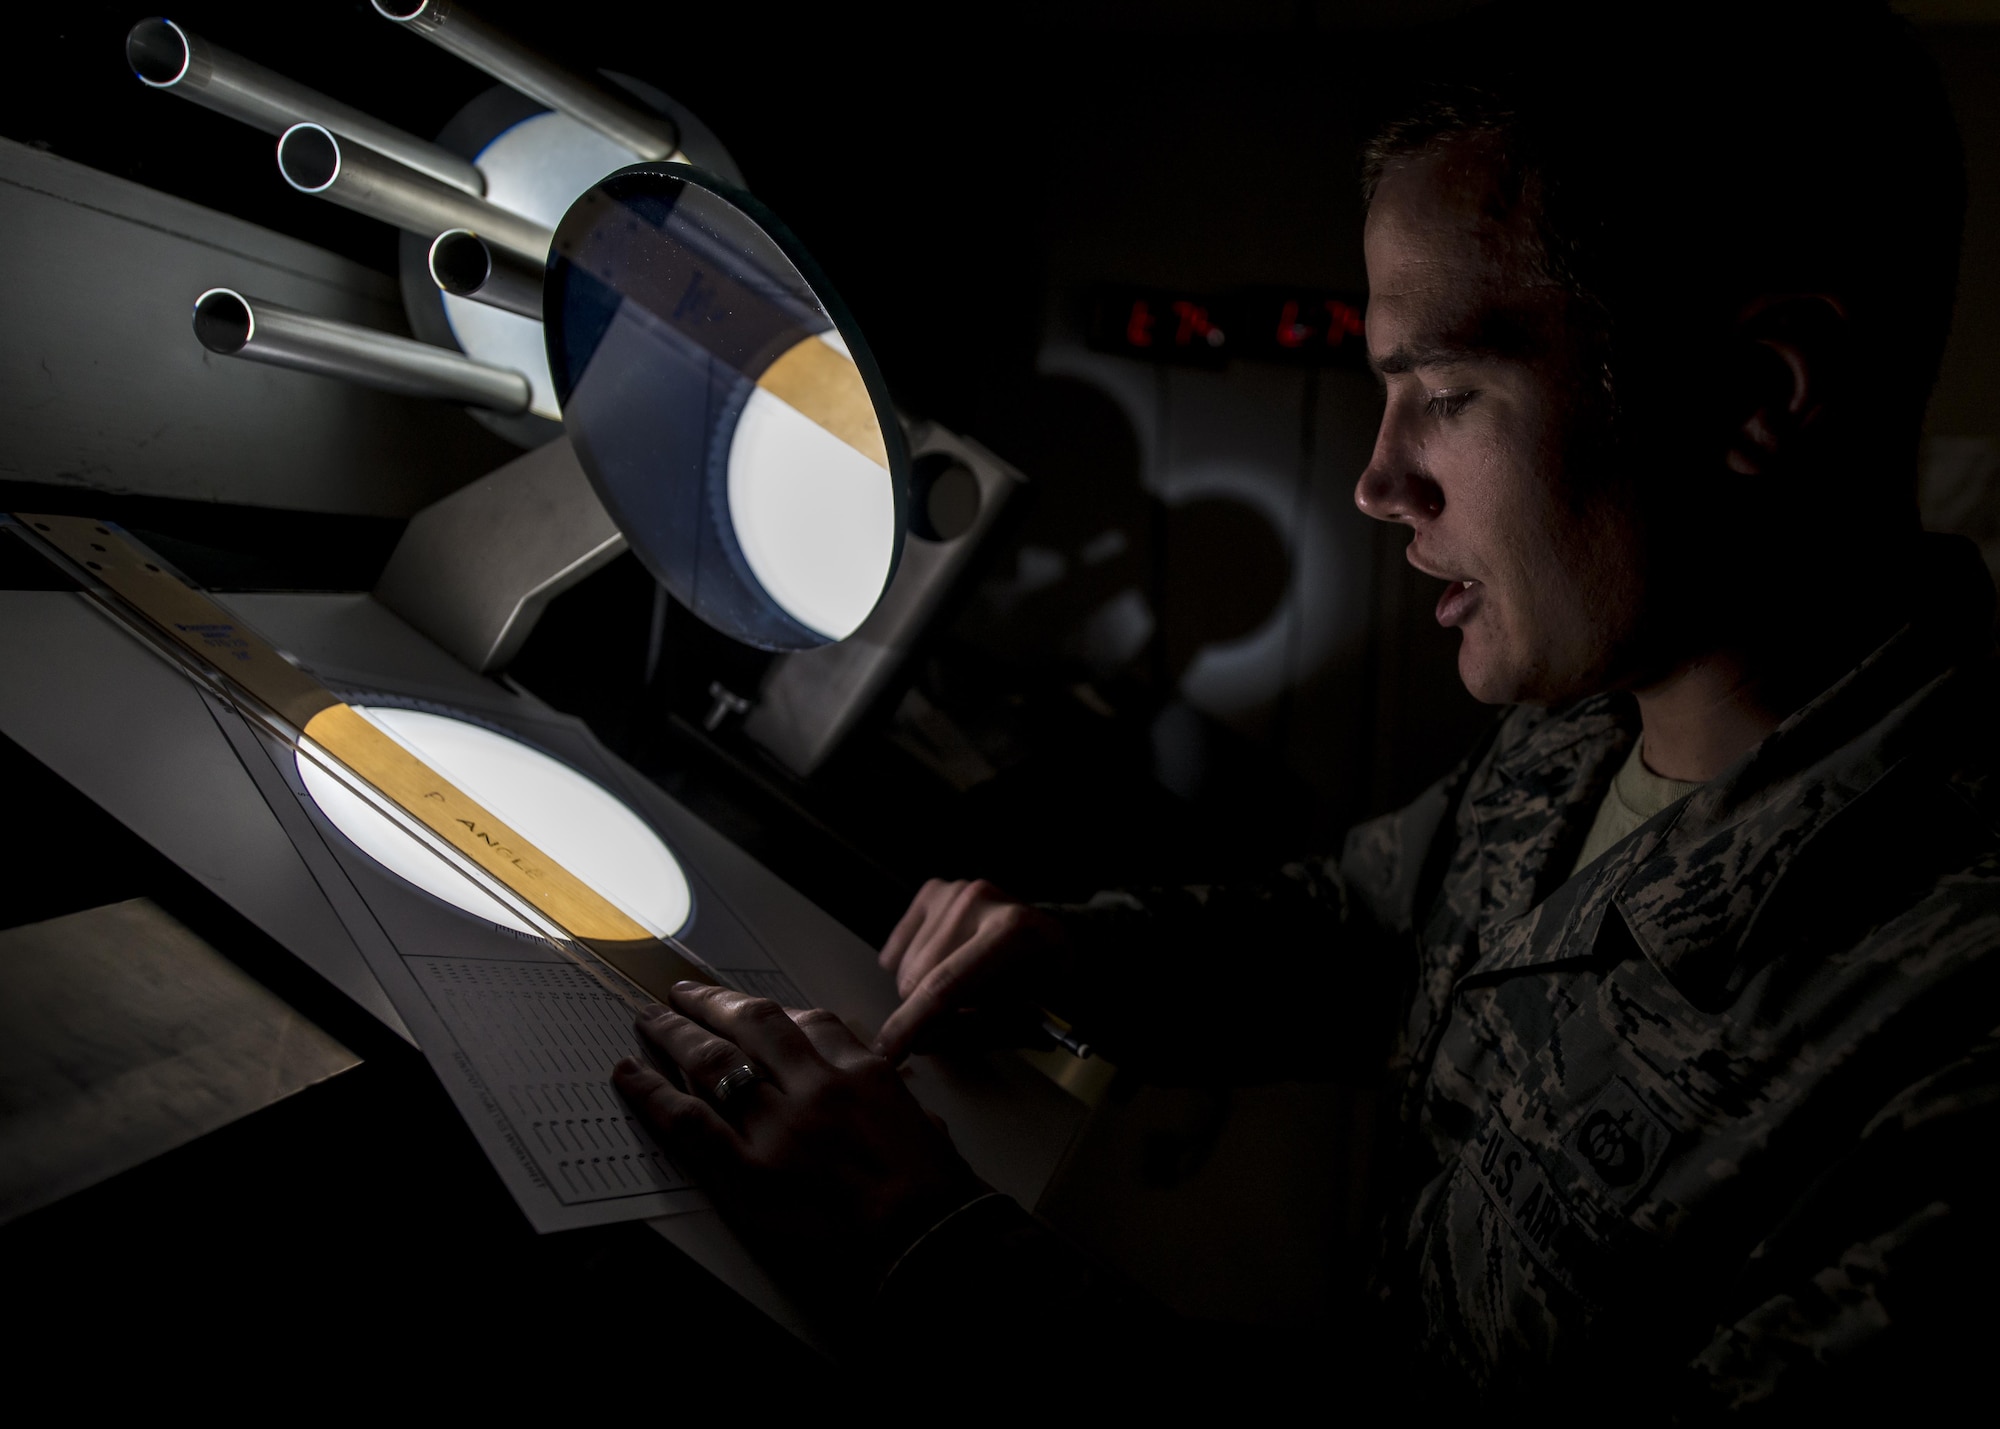 Staff Sgt. Erin O’Connell, a solar analyst with Detachment 2, 2nd Weather Squadron, creates a sunspot drawing from a projected image of the sun at the Holloman Solar Observatory on Holloman Air Force Base, N.M., Sept. 24, 2015. Sunspots are temporary phenomena on the visible surface of the sun that appear visibly as dark spots compared to surrounding regions. The solar analysts closely monitor this information in order to safeguard and protect important assets in both civilian and Defense Department agencies. (U.S. Air Force photo/Senior Airman Aaron Montoya)